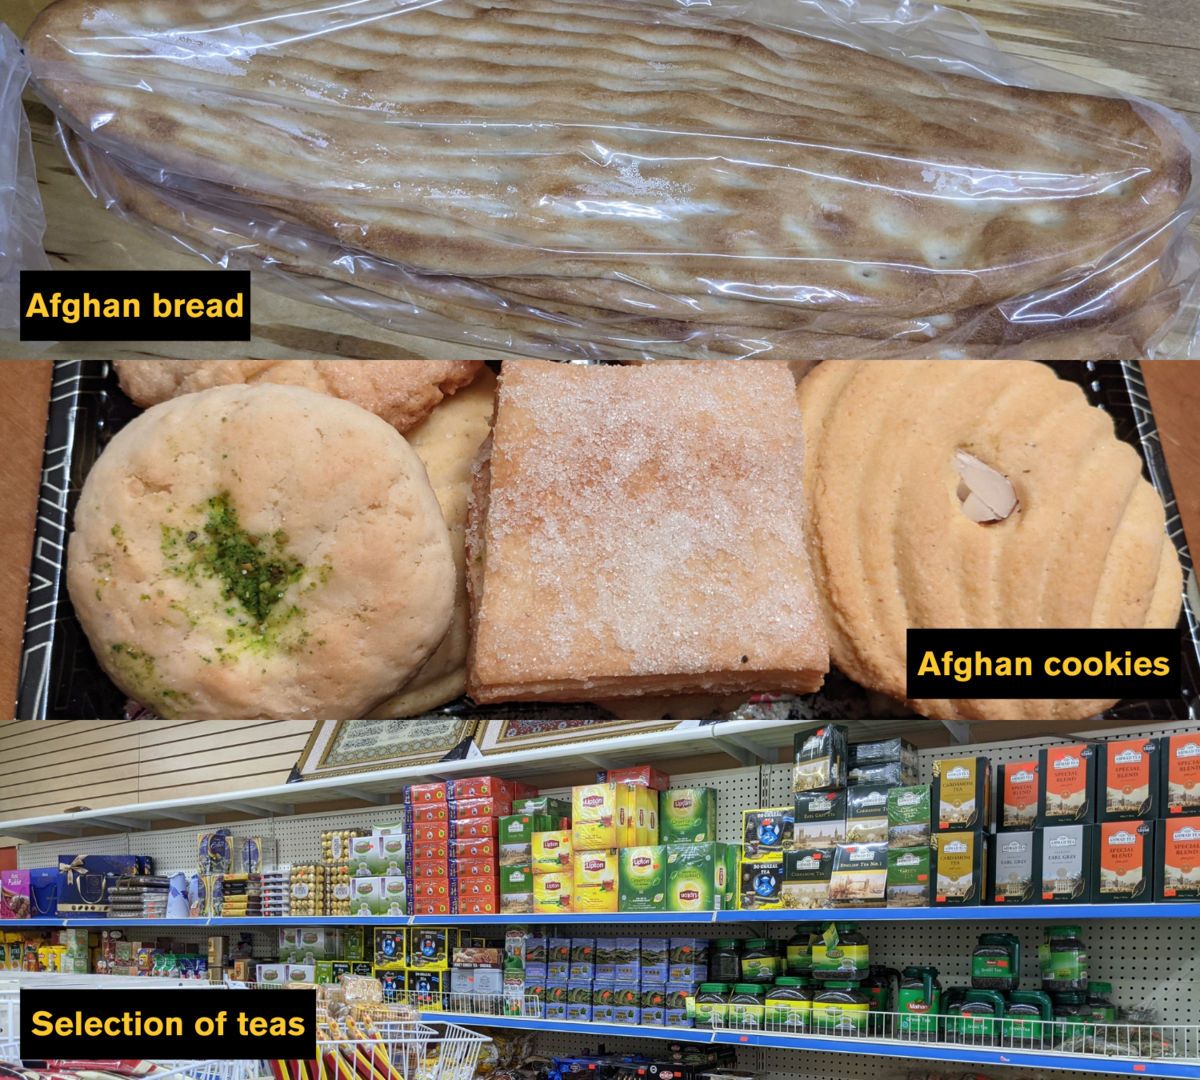 A collage of three photos of snacks: on top, a loaf of Afghan bread; in the middle, three Afghan cookies; and on the bottom, a selection of teas on a grocery store shelf.